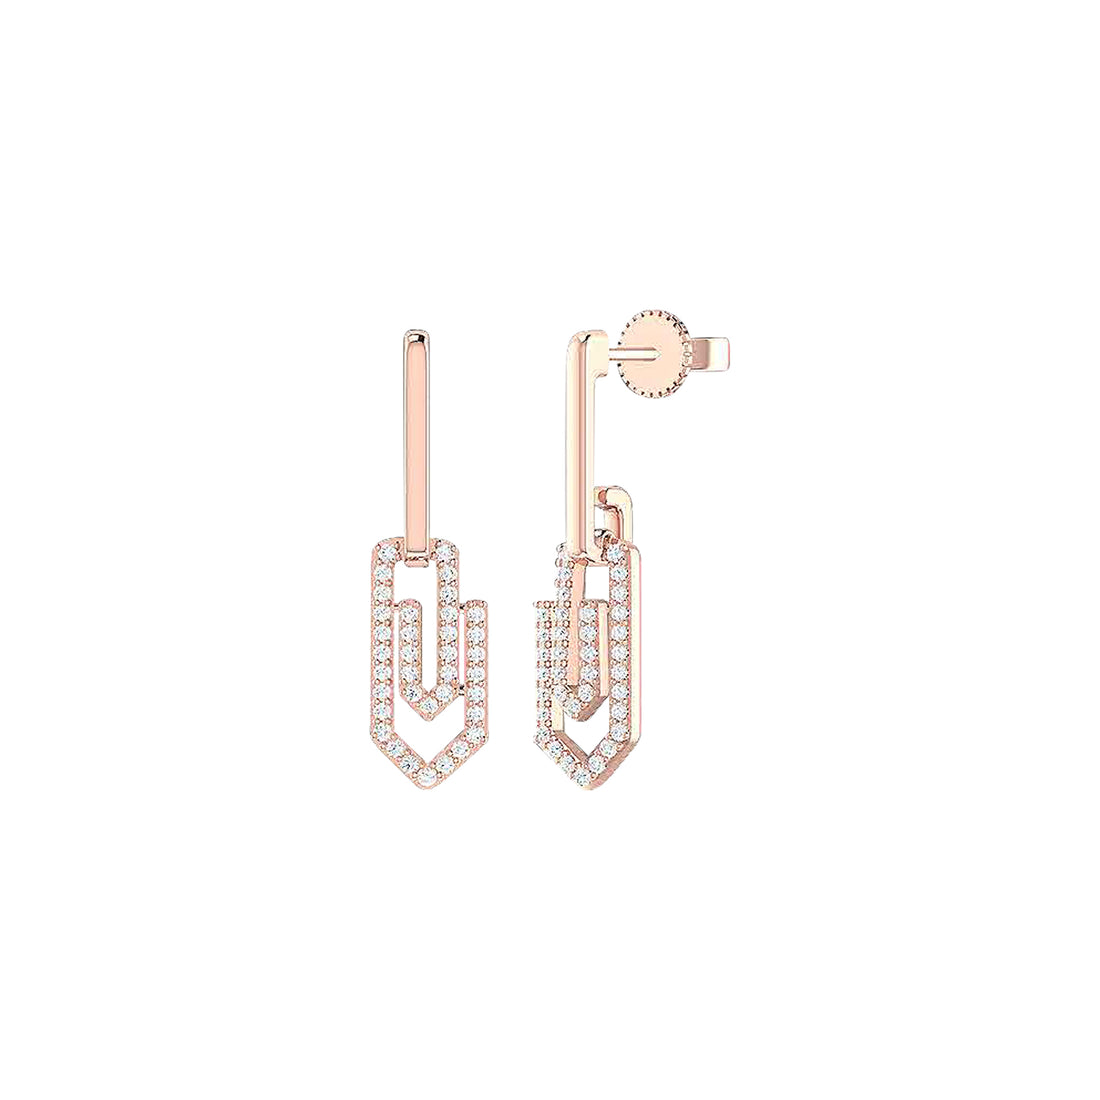 18K Gold and Diamonds Paperclip Earrings